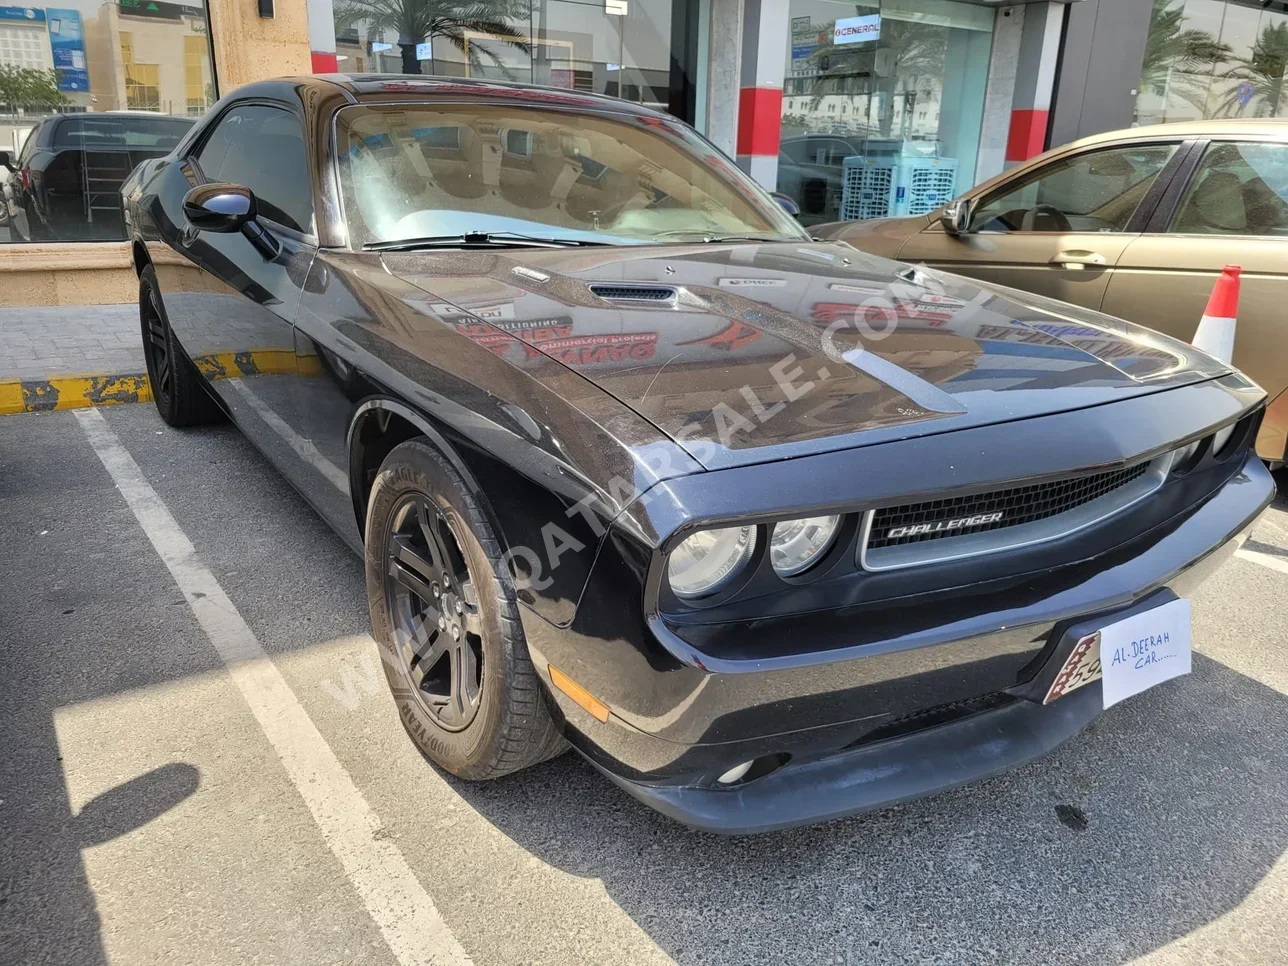 Dodge  Challenger  2013  Automatic  190,000 Km  6 Cylinder  Rear Wheel Drive (RWD)  Coupe / Sport  Black